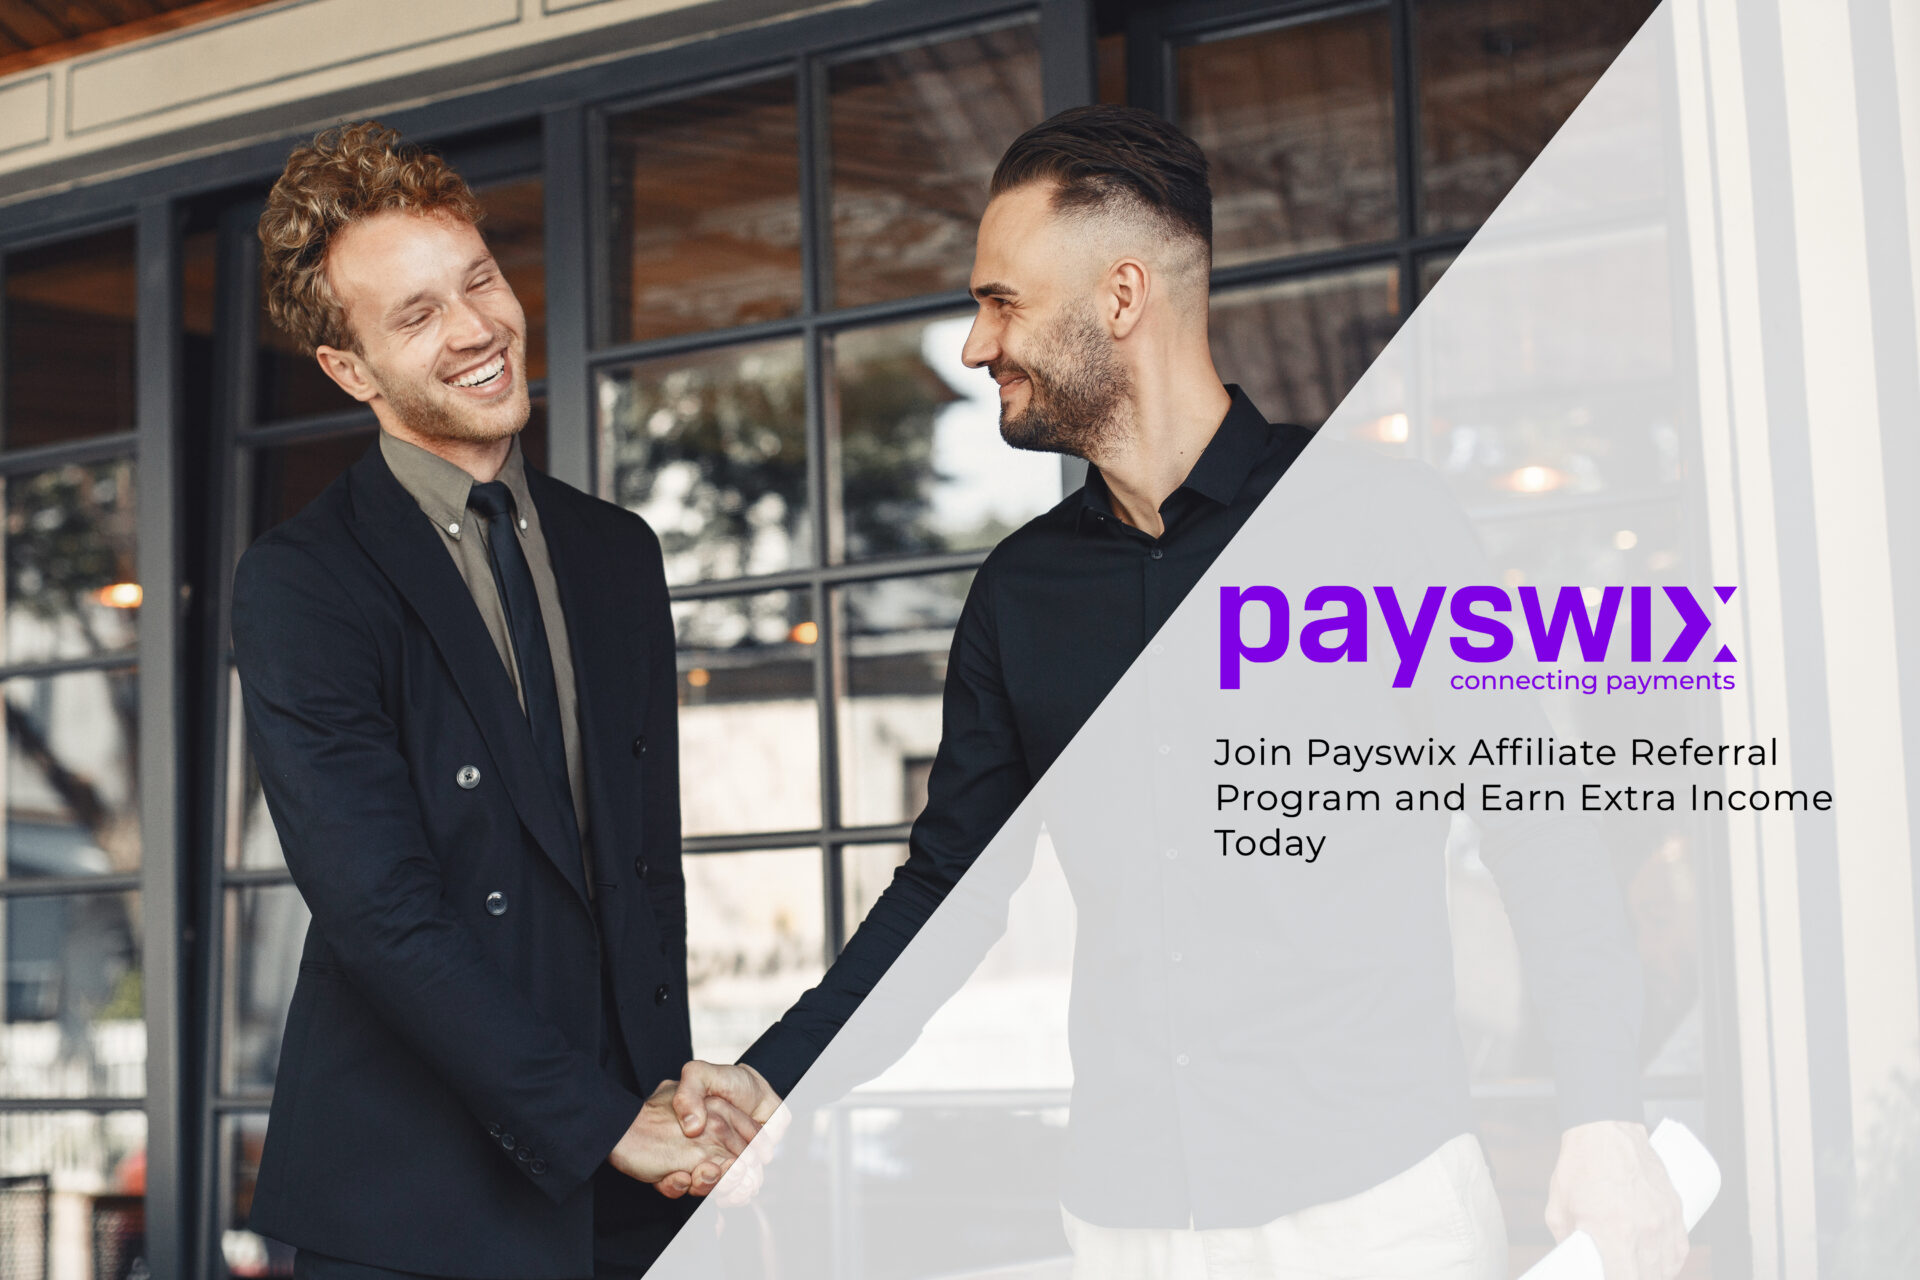 Join Payswix Affiliate Referral Program and Earn Extra Income Today